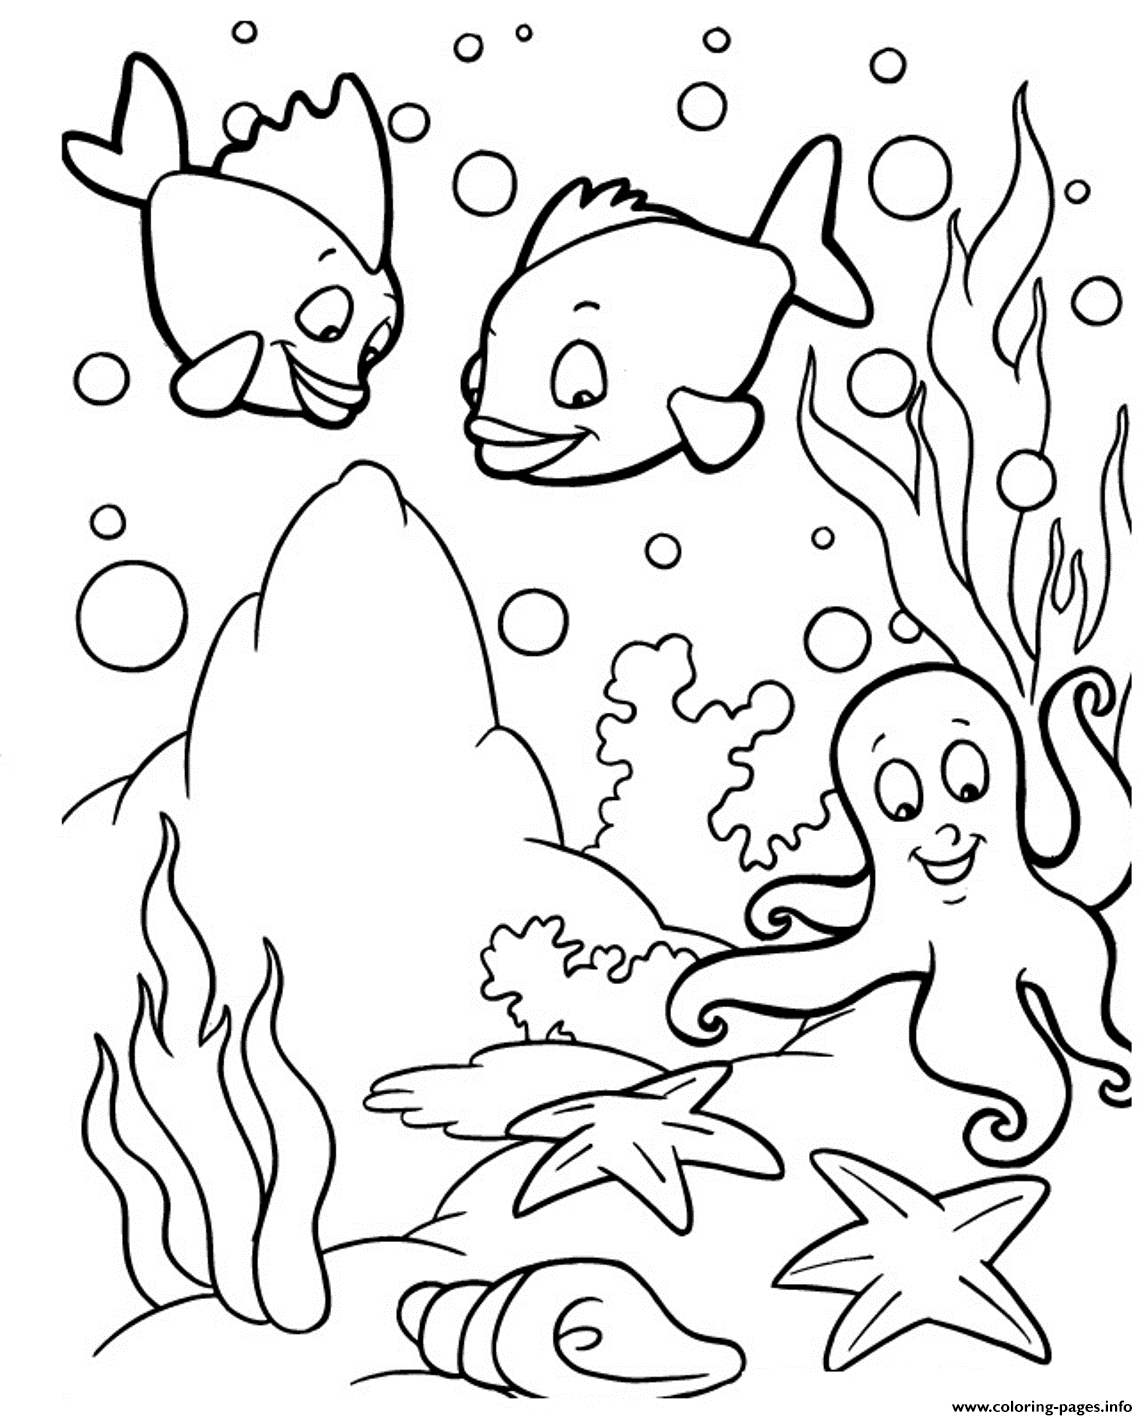 Coloring Pages Of Sea Animals For Kids499f coloring